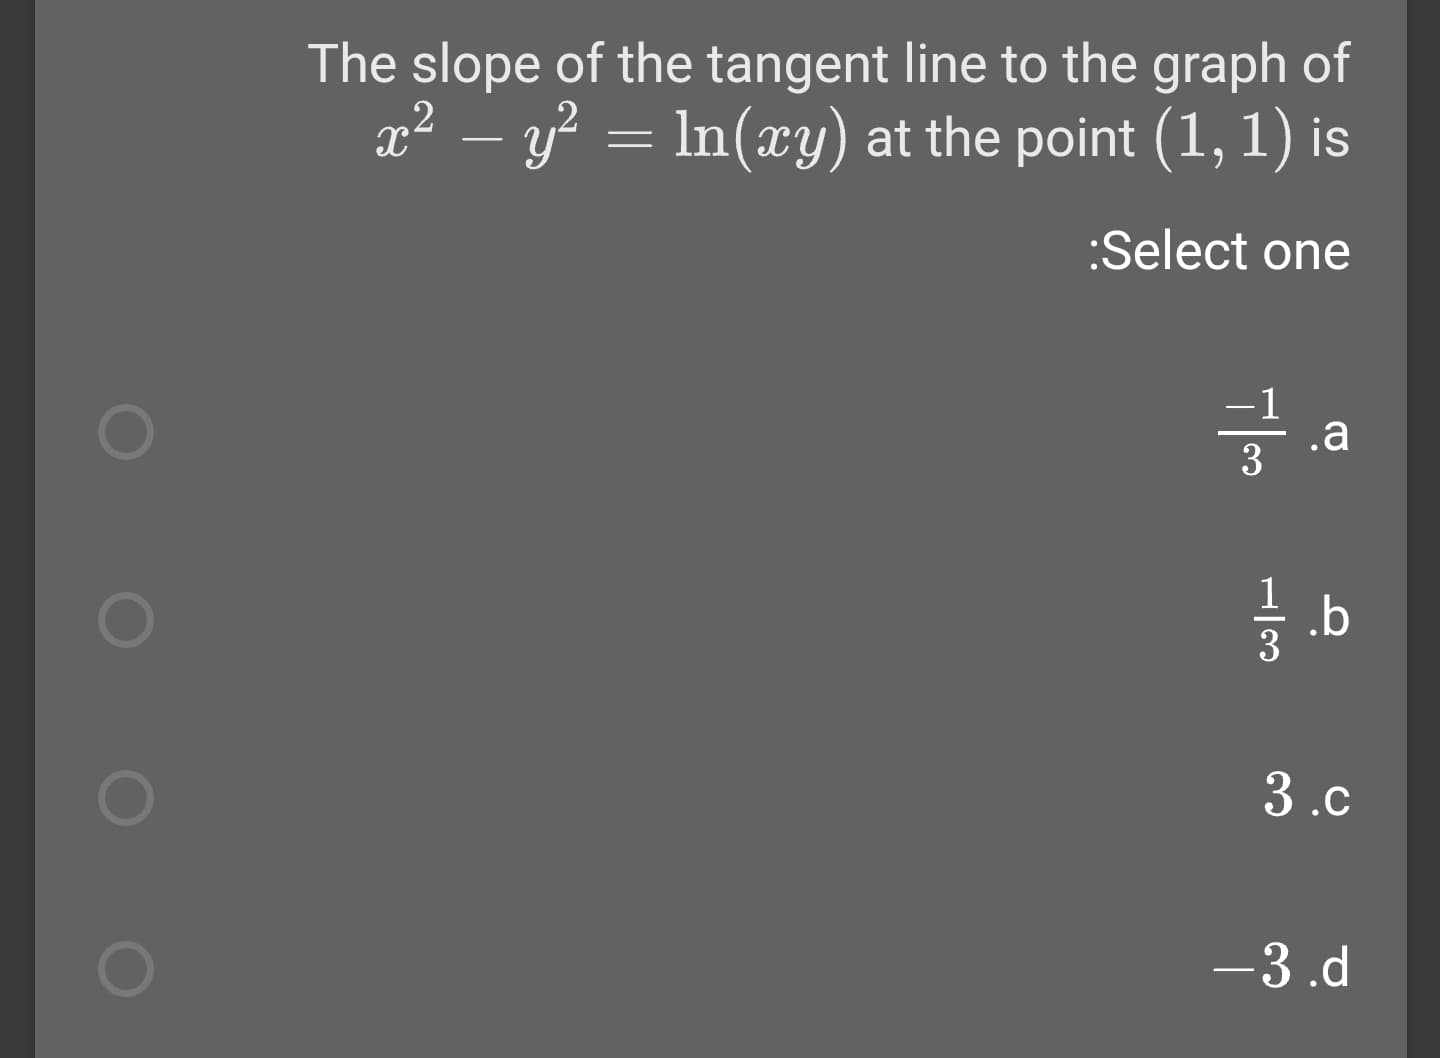 The slope of the tangent line to the graph of
x2 – y? = ln(xy) at the point (1, 1) is
